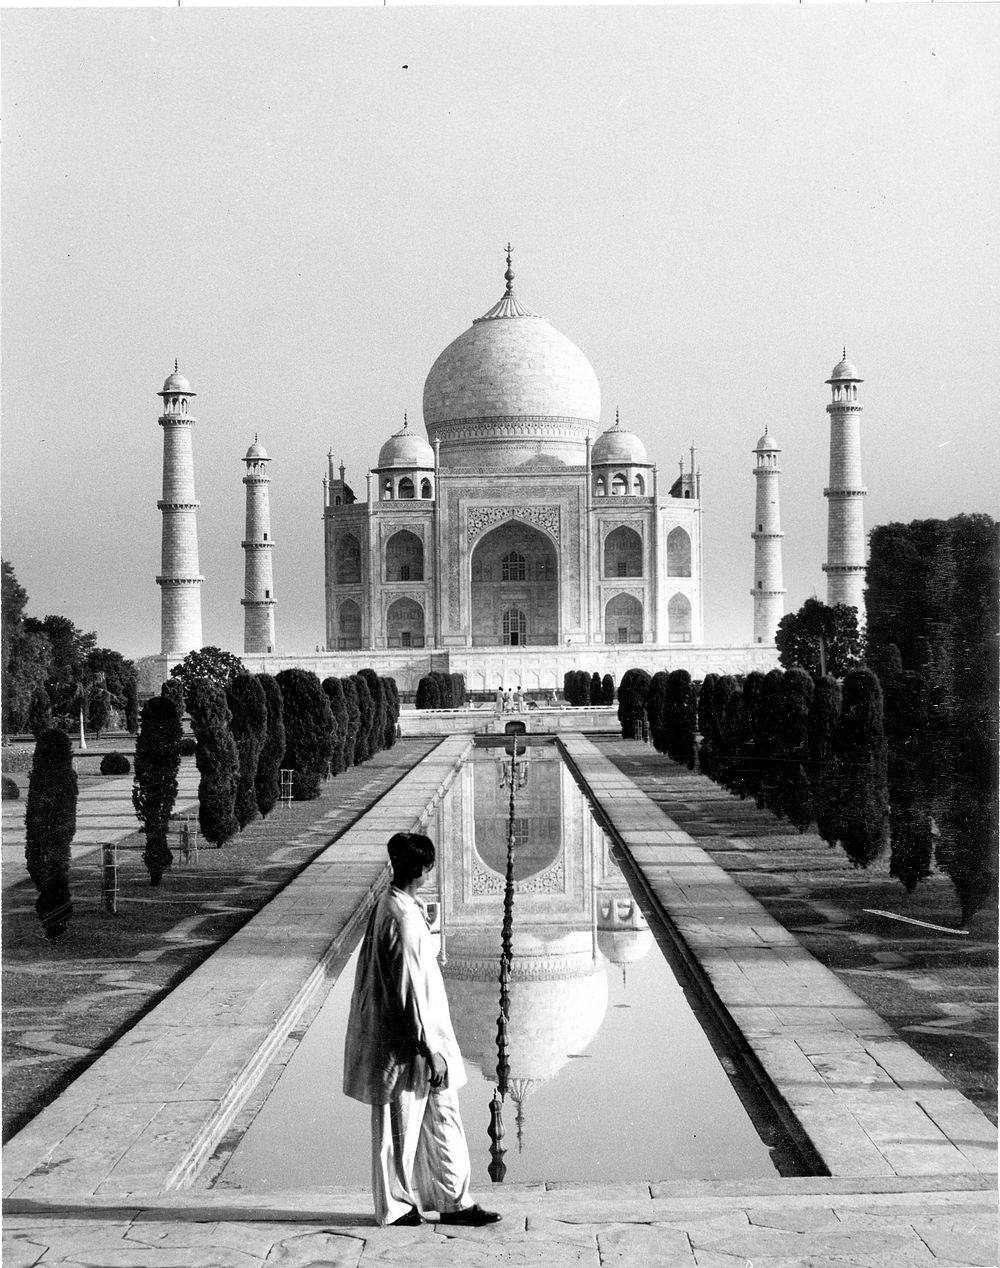 A citizen of Agra, India, appraises the marble mausoleum erected in his city over 300 years ago by an Emperor for his wife.…